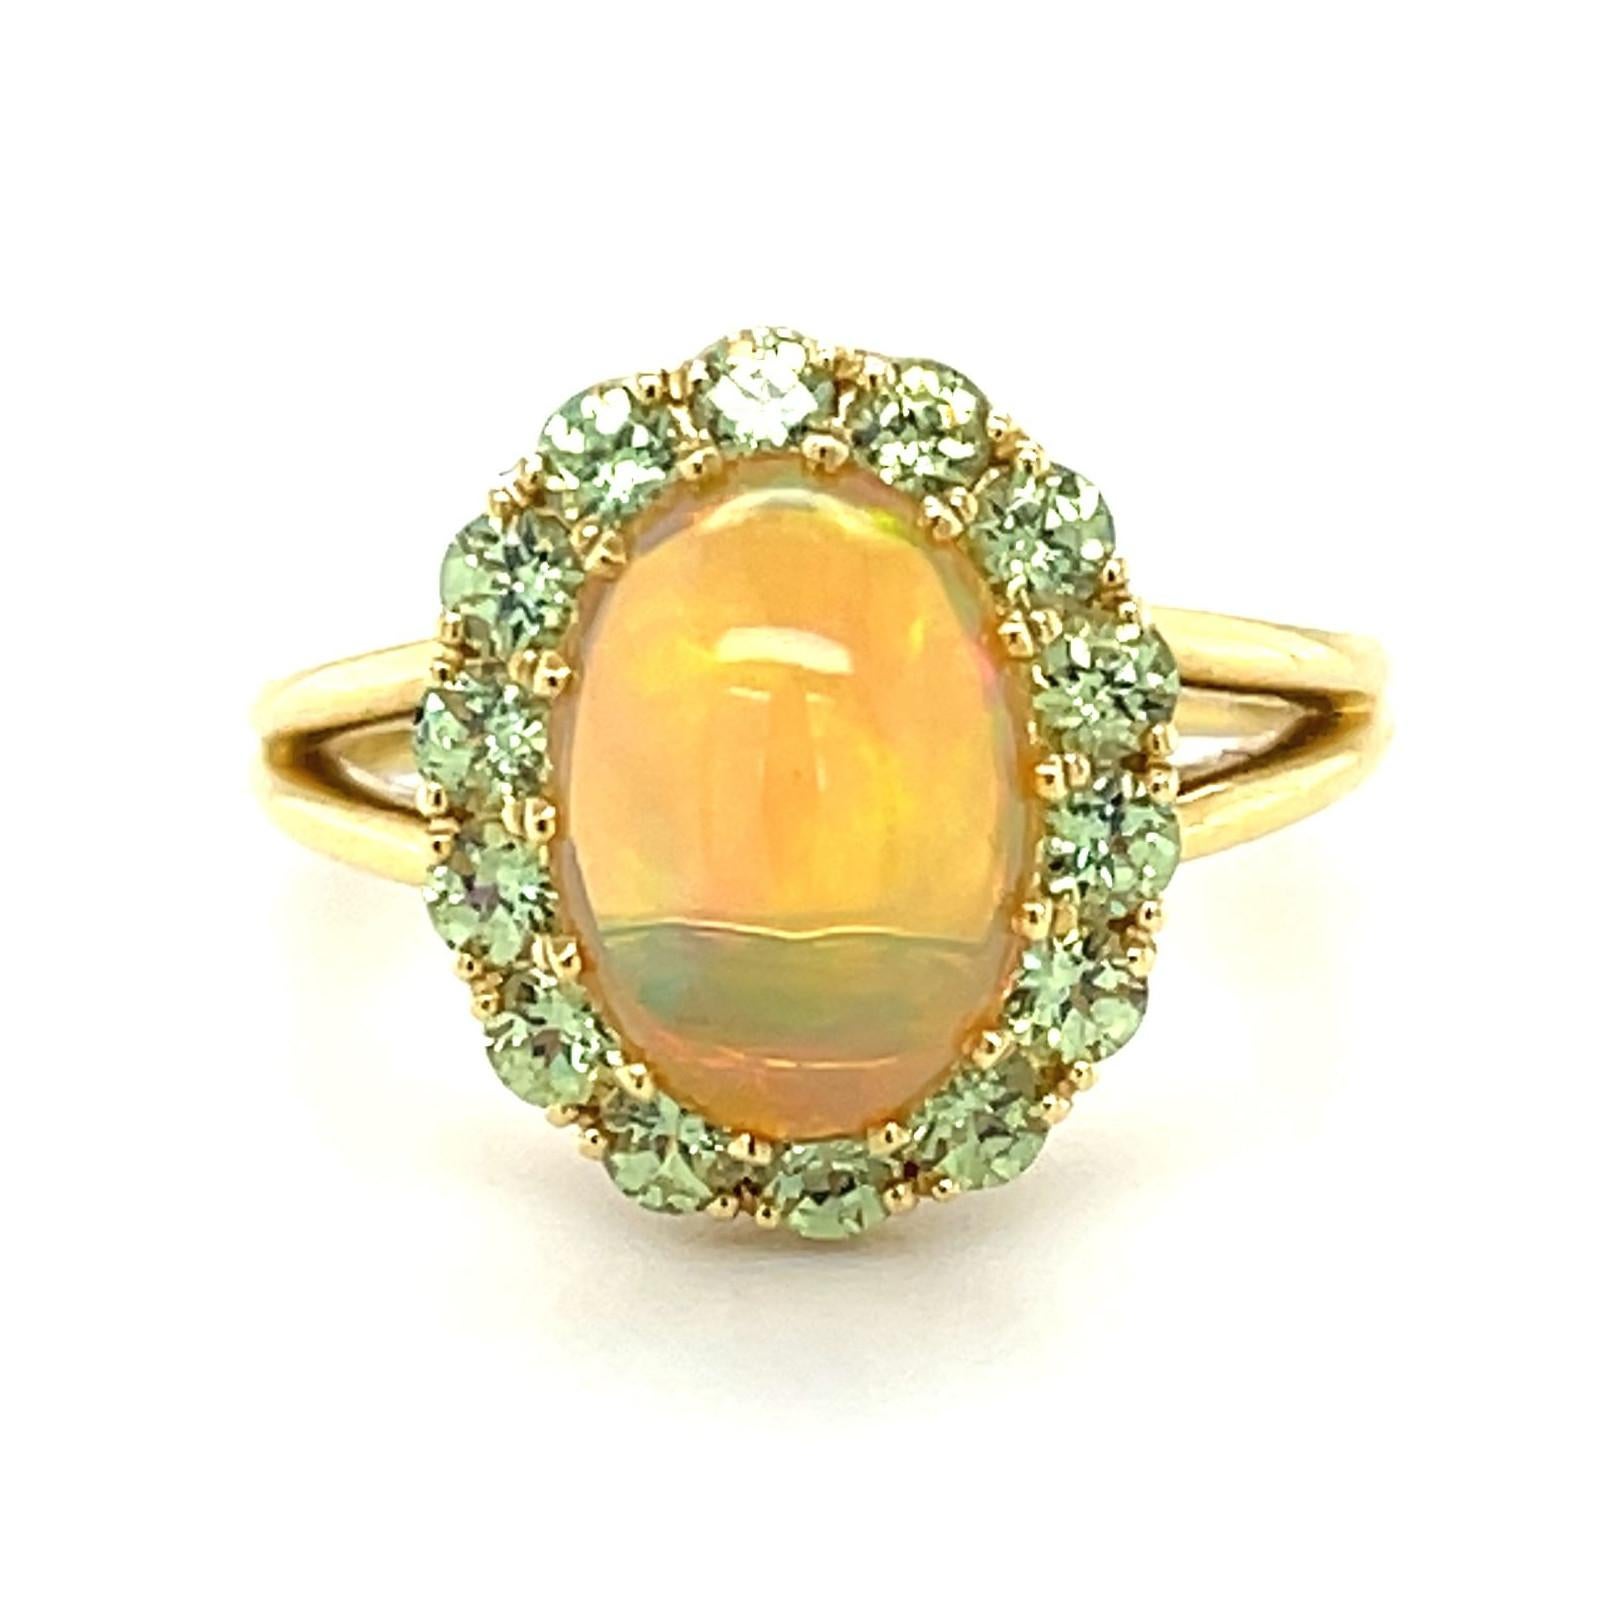 This stunning cocktail ring features a beautifully high-domed opal set in 18k yellow gold and framed with sparkling round Tsavorite green garnets! The opal is a 2.40 carat gem with gorgeous play-of-color, and the greens in the center gem come to